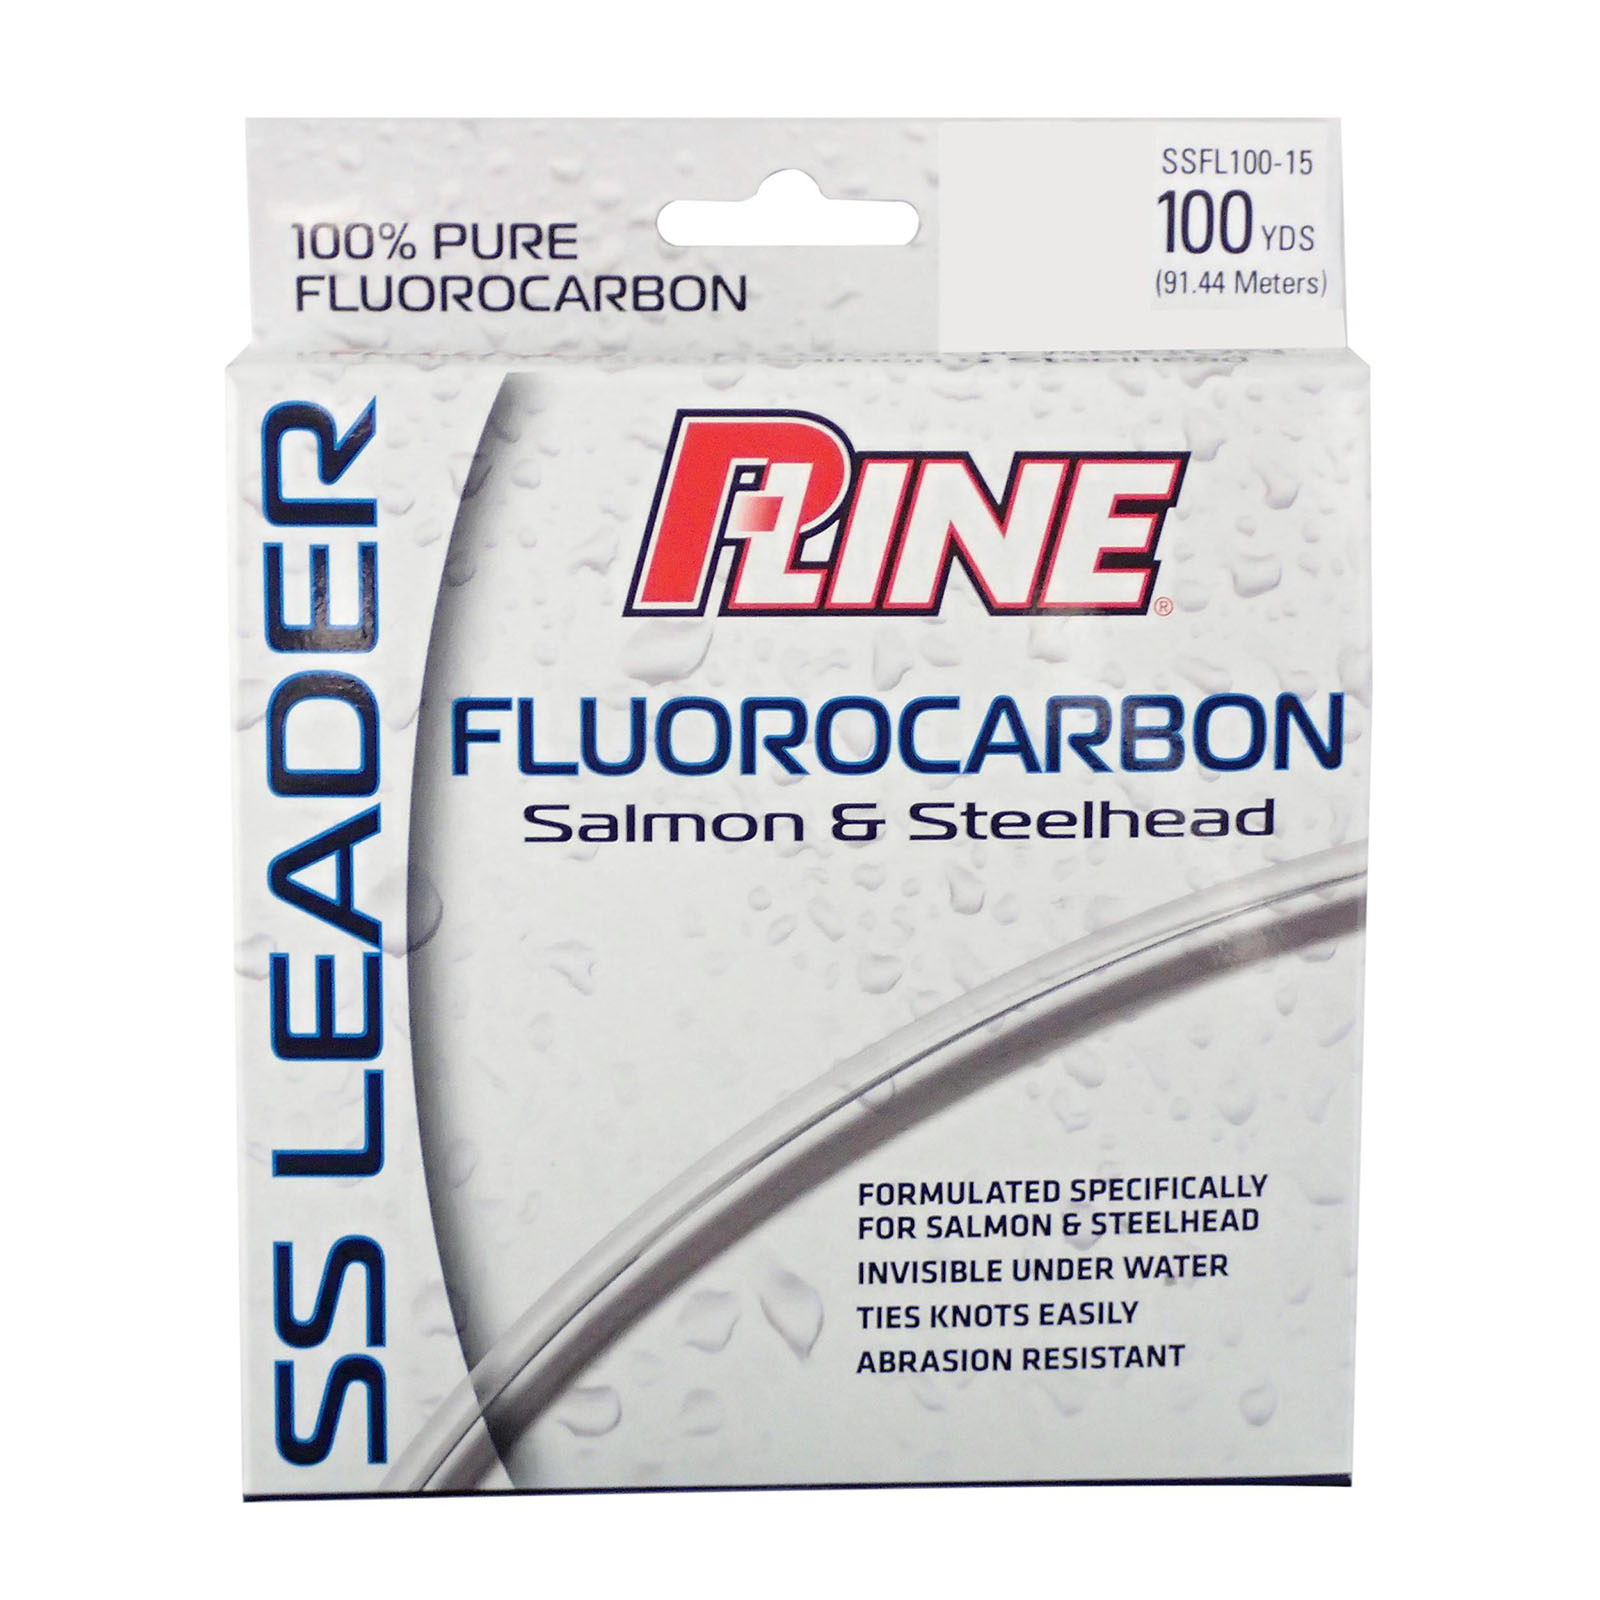 P-Line Hydrofloat Thermal Fused Spectra Line